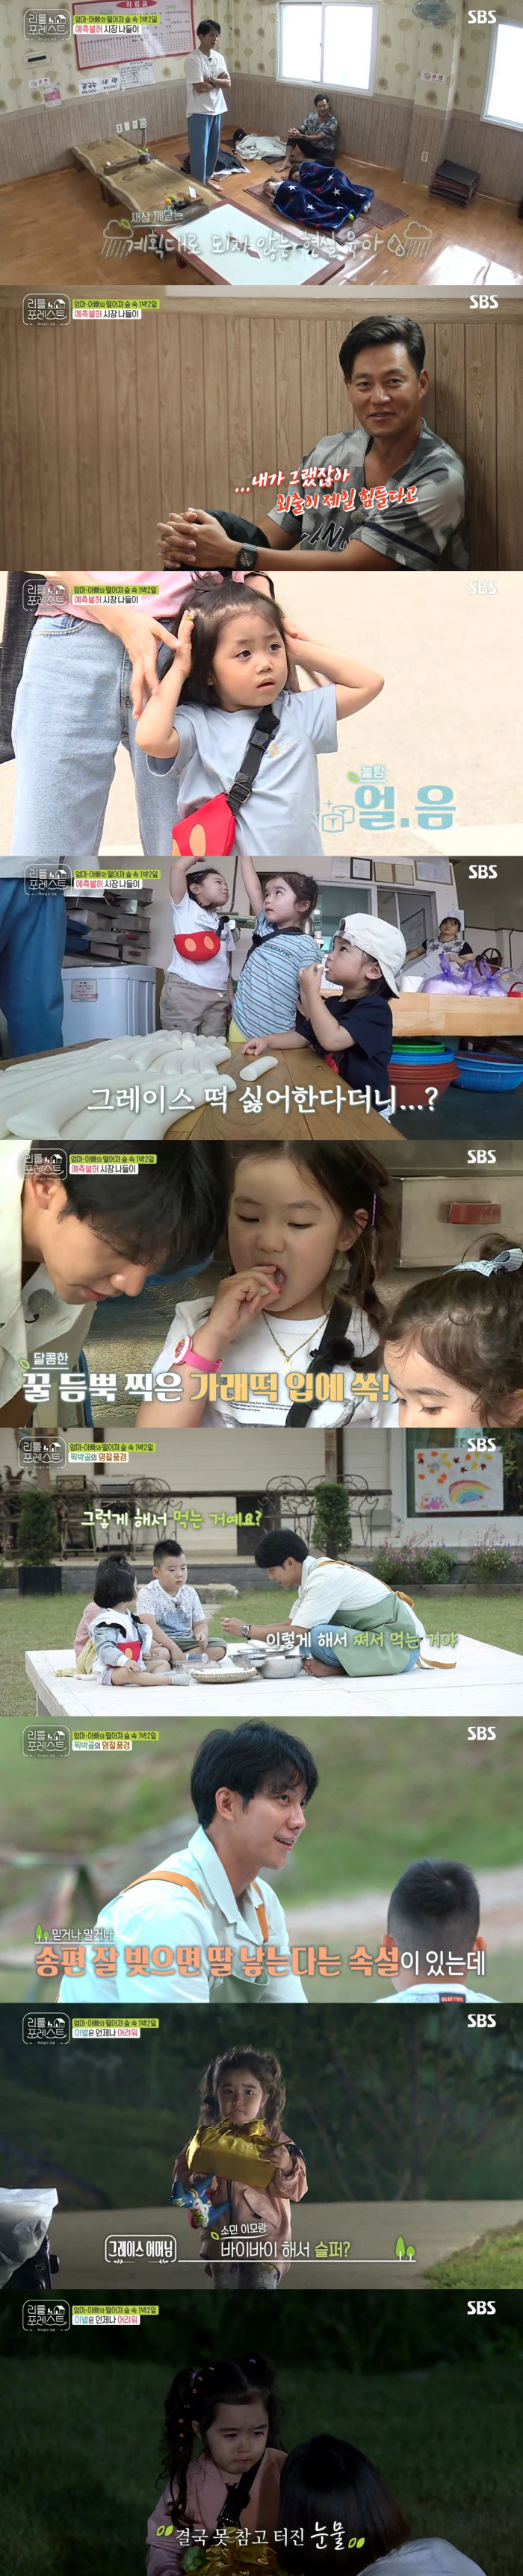 SBS Wall Street Arts Little Forest soared to 6.1% of the highest audience rating per minute.On SBS Little Forest broadcast on the 17th (Tuesday), Lee Seo-jin, Lee Seung-gi, Park Na-rae and Jung So-min, who were on a tour of the market for Chuseok, were portrayed.The carers and the Littles headed to the market to buy the ingredients for the holiday food, and the Littles were excited about the first market outing with The Uncle and Auntie.But for a moment, Lee Seung-gi and Lee Seo-jin lamented that if you have children, you do not have anything to do with them, the little ones who fell asleep deeply in the car.Lee Seung-gi and Lee Seo-jin sighed when they left Little in the restaurant.In the meantime, Park Na-rae and Jung So-min had a good time watching the process of popping with Lee Han and Ye Jun.Waking up, Eugene, Grace and Gaon headed for the market mill with Lee Seung-gi, who were happy to eat freshly-made rice cakes in honey.Since then, I have bought hot dogs in the market and have enjoyed a pleasant outing with lunch together.After returning home after finishing the shopping, they started making Chuseok food such as Songpyeon and the war.Following the demonstration of Lee Seung-gi The Uncle, the master of Songpyeon, Little also participated in the songpyeon debt by sitting on the Onggi bell.The family-like appearance of preparing Chuseok food together made me smile.In particular, Lee Seung-gi said, Is not there a myth that you will have a daughter if you make a songpyeon well?Little Lee enjoyed a generous dinner with the finished Songpyeon and Chuseok food.Later, the breakup time came for Littles to take their familys hands and return. Grace stopped and started crying.To her mother, Grace cried, I miss Aunt Somin. The scene soared to 6.1 percent per minute, taking the best minute.SBS Little Forest is broadcast every Monday and Tuesday at 10 pm.